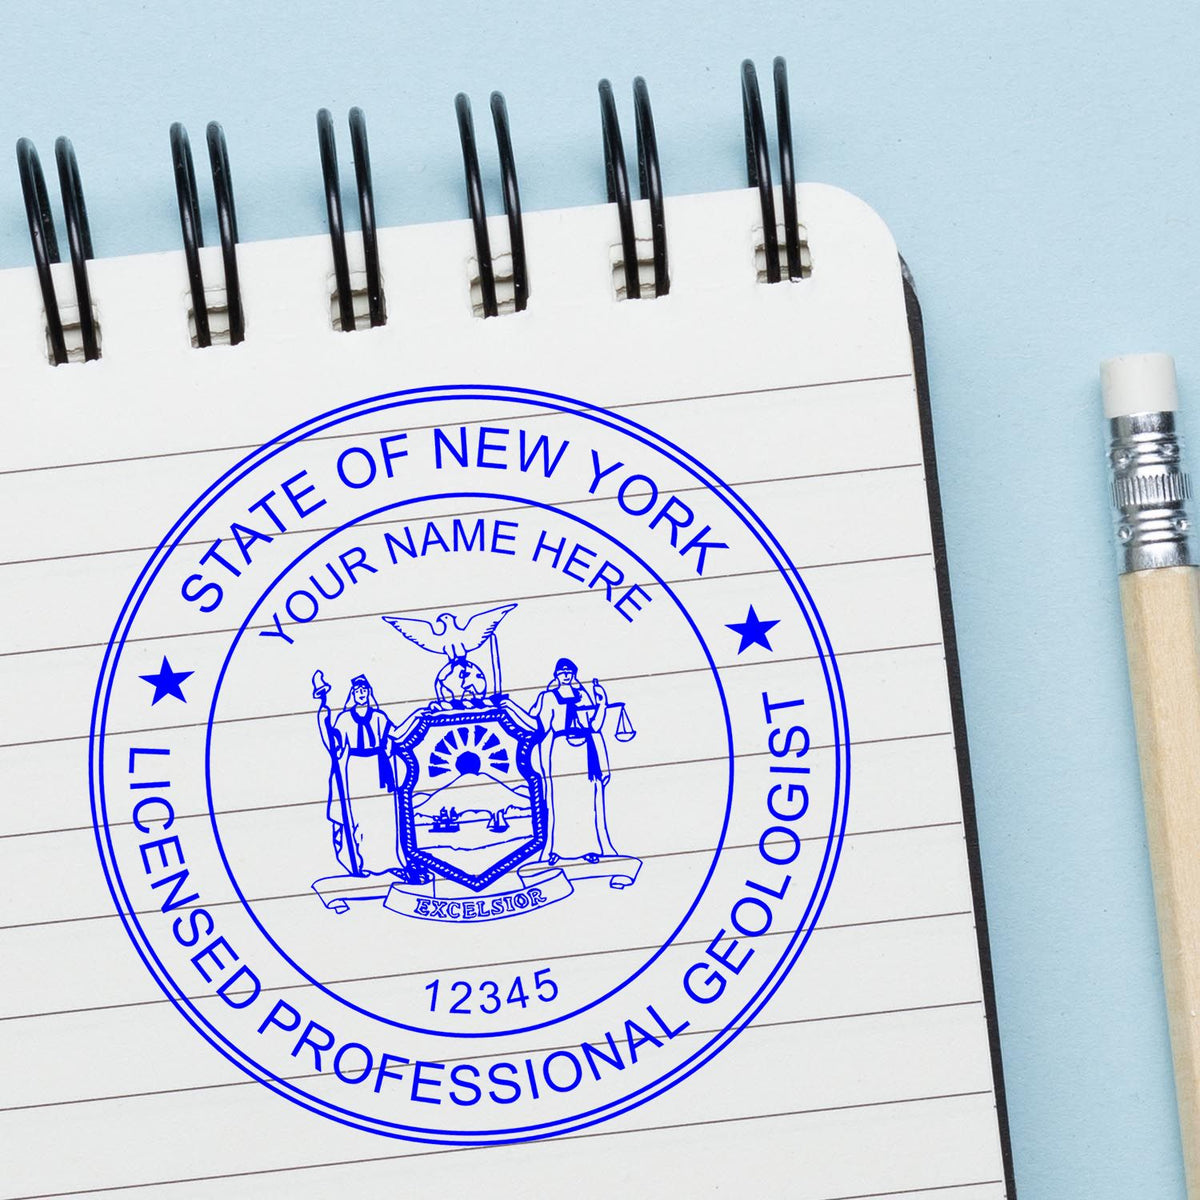 Another Example of a stamped impression of the Premium MaxLight Pre-Inked New York Geology Stamp on a office form